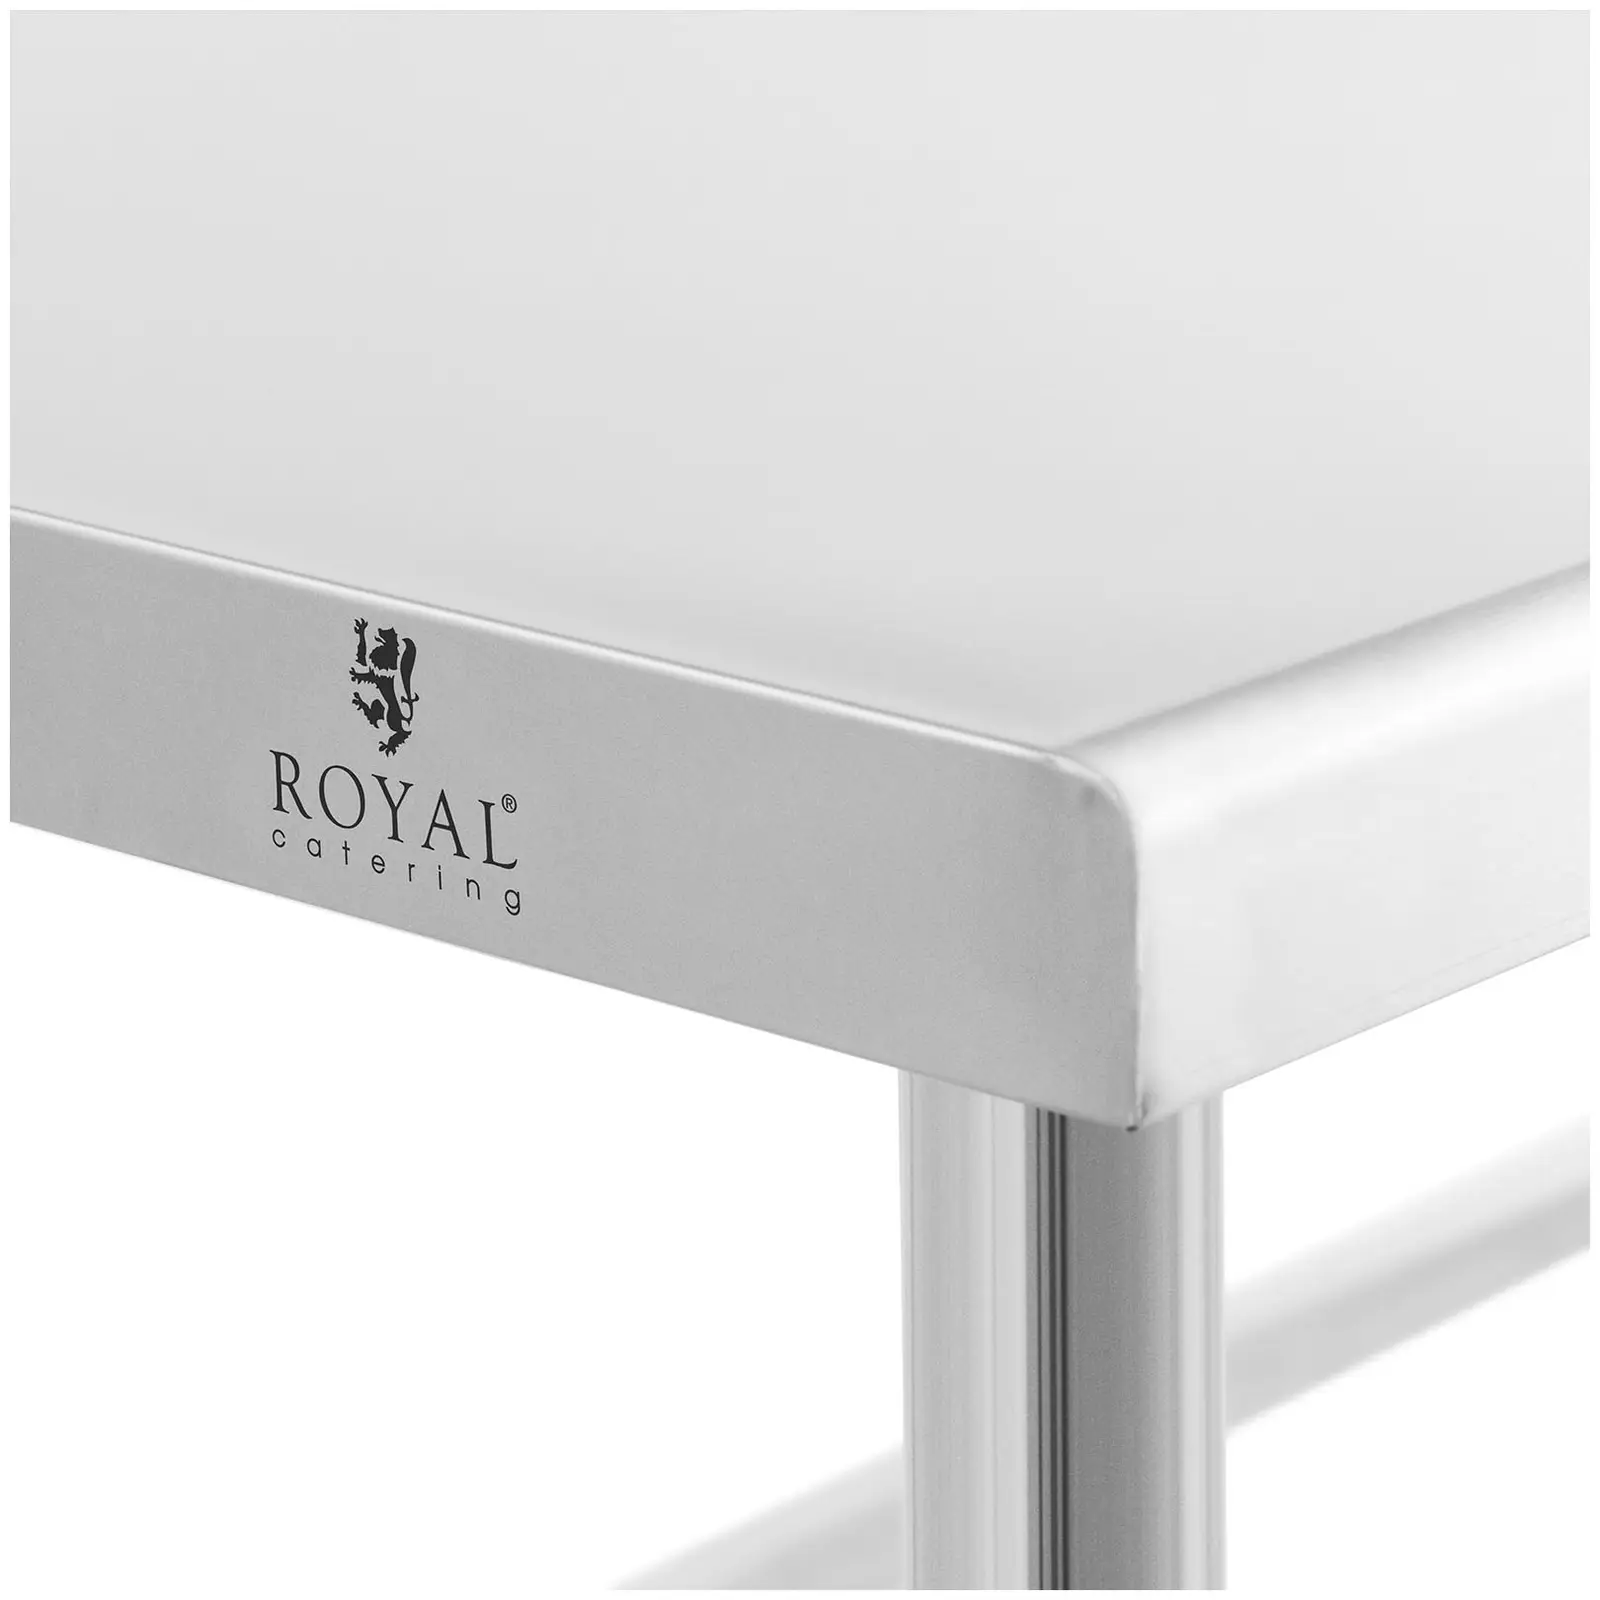 Stainless steel table - 120 x 70 cm - 93 kg load capacity - Royal Catering